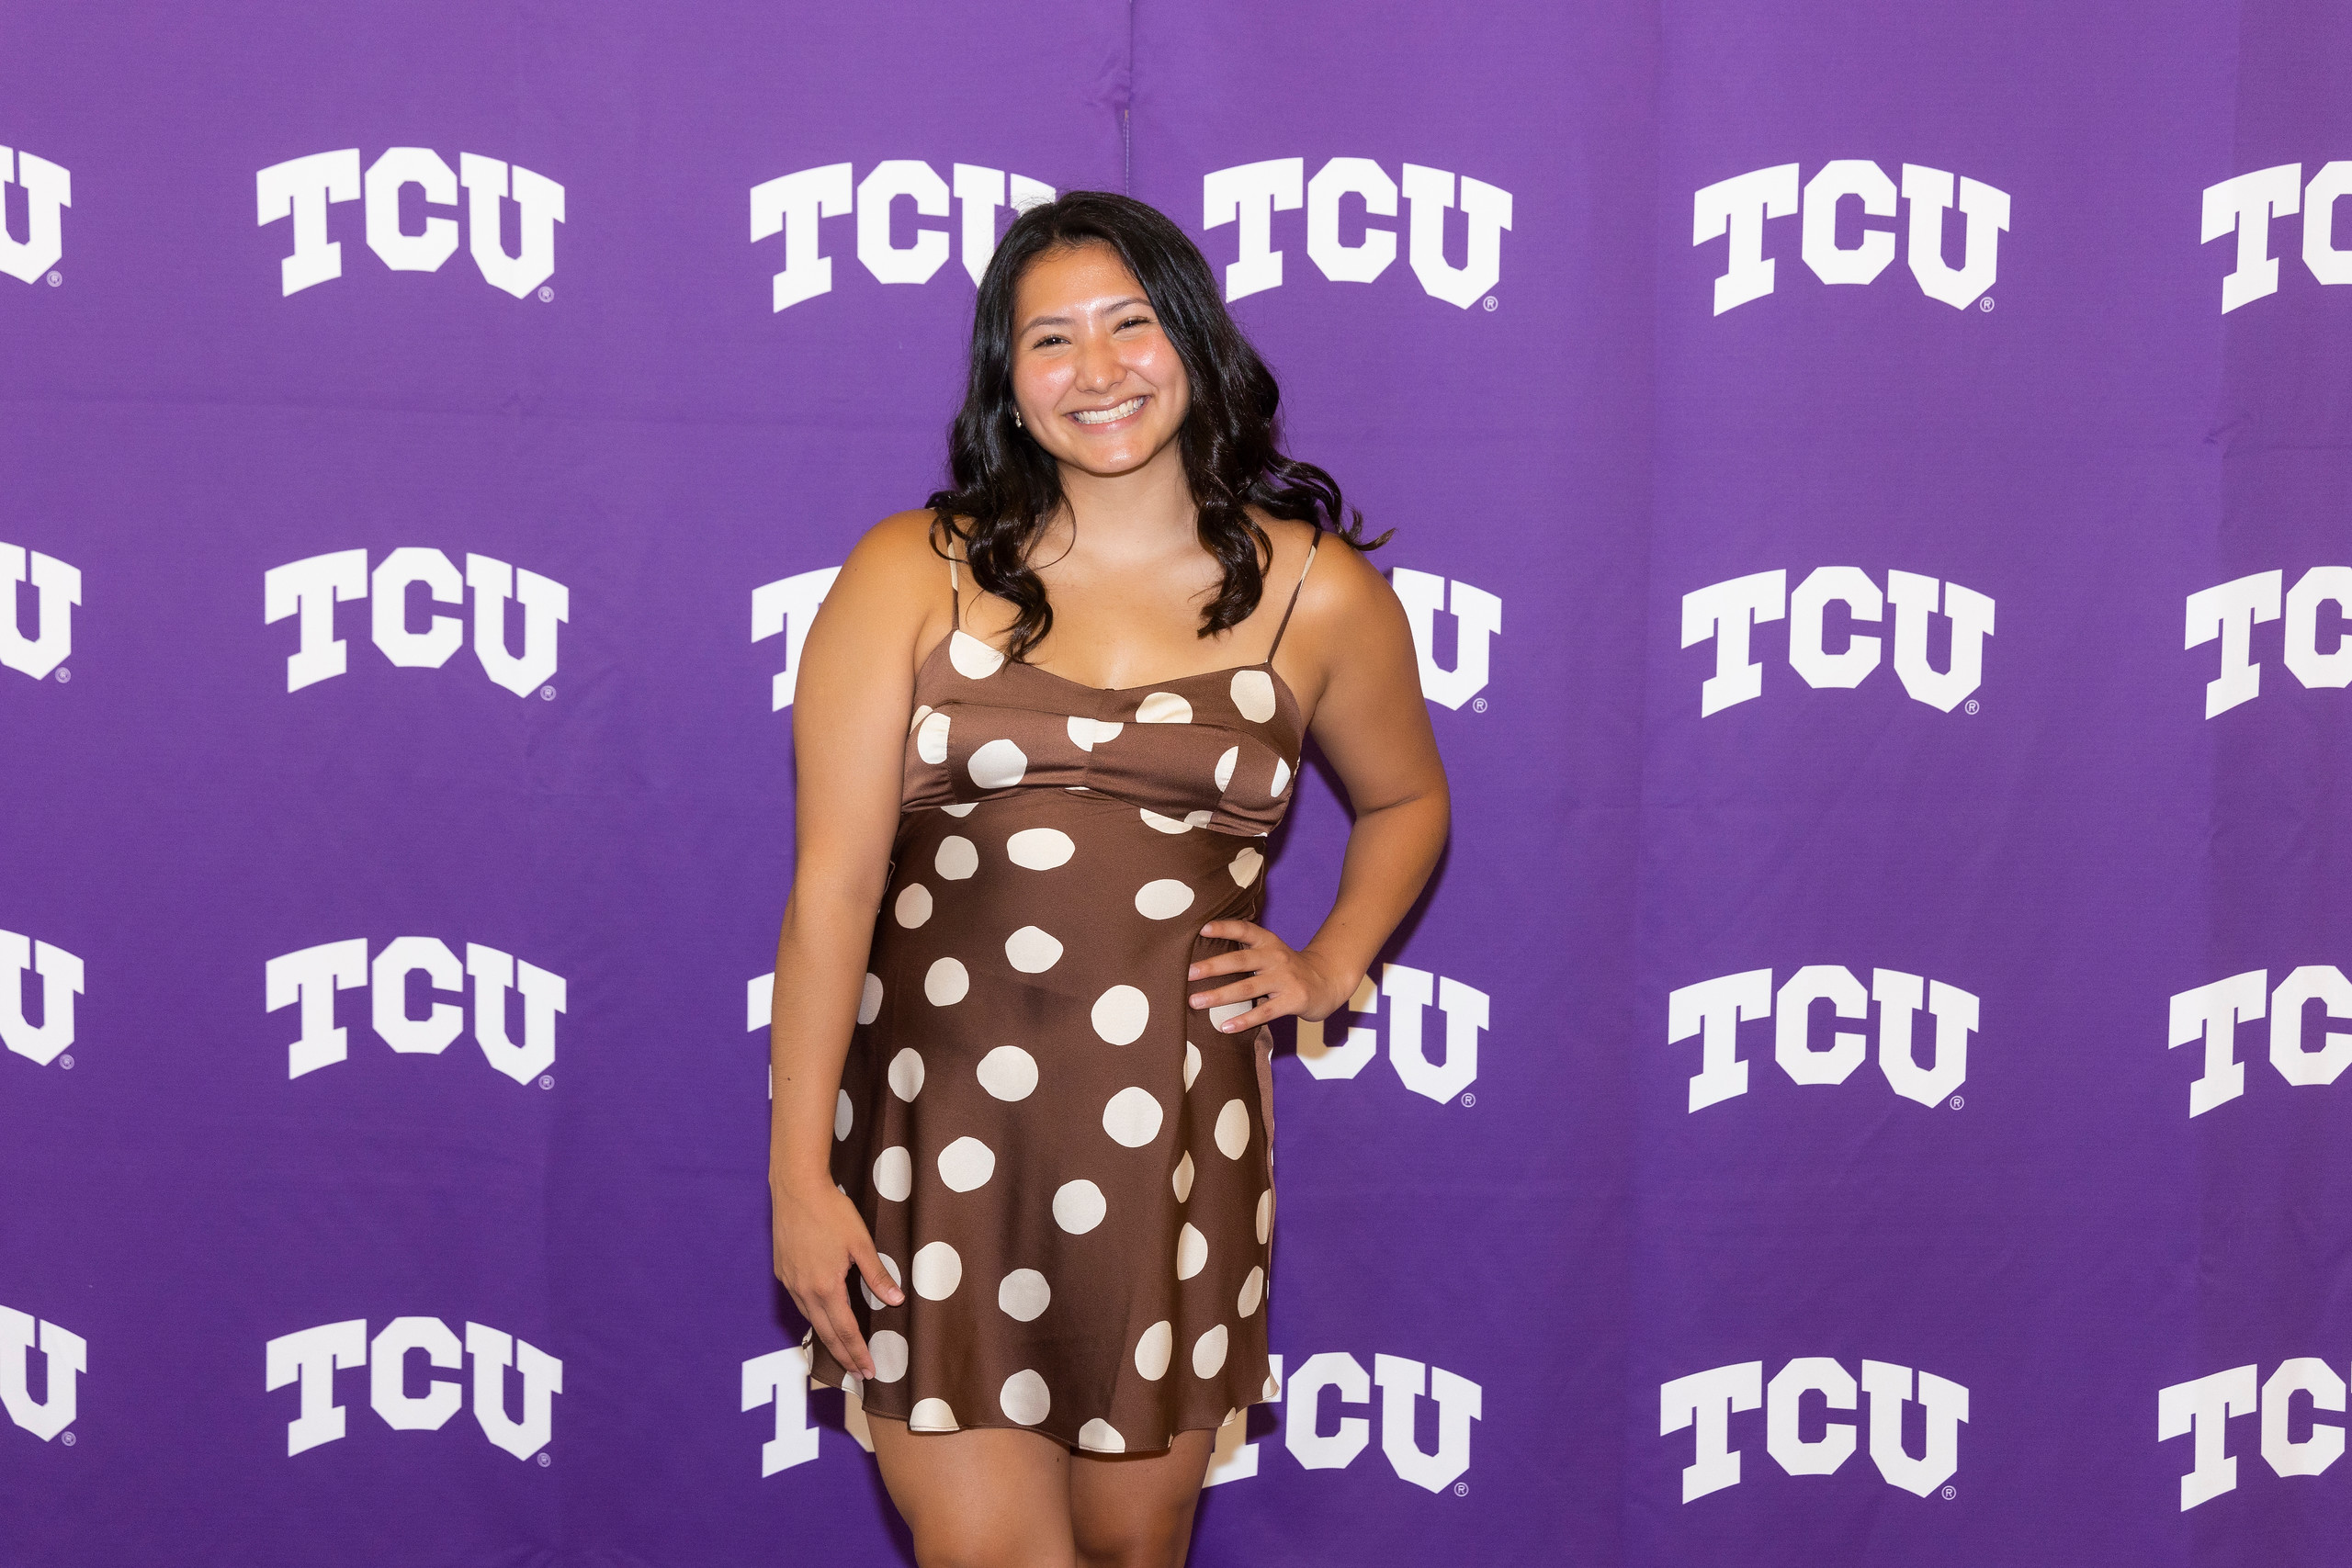 Gracie Liang posing in front of a TCU backdrop